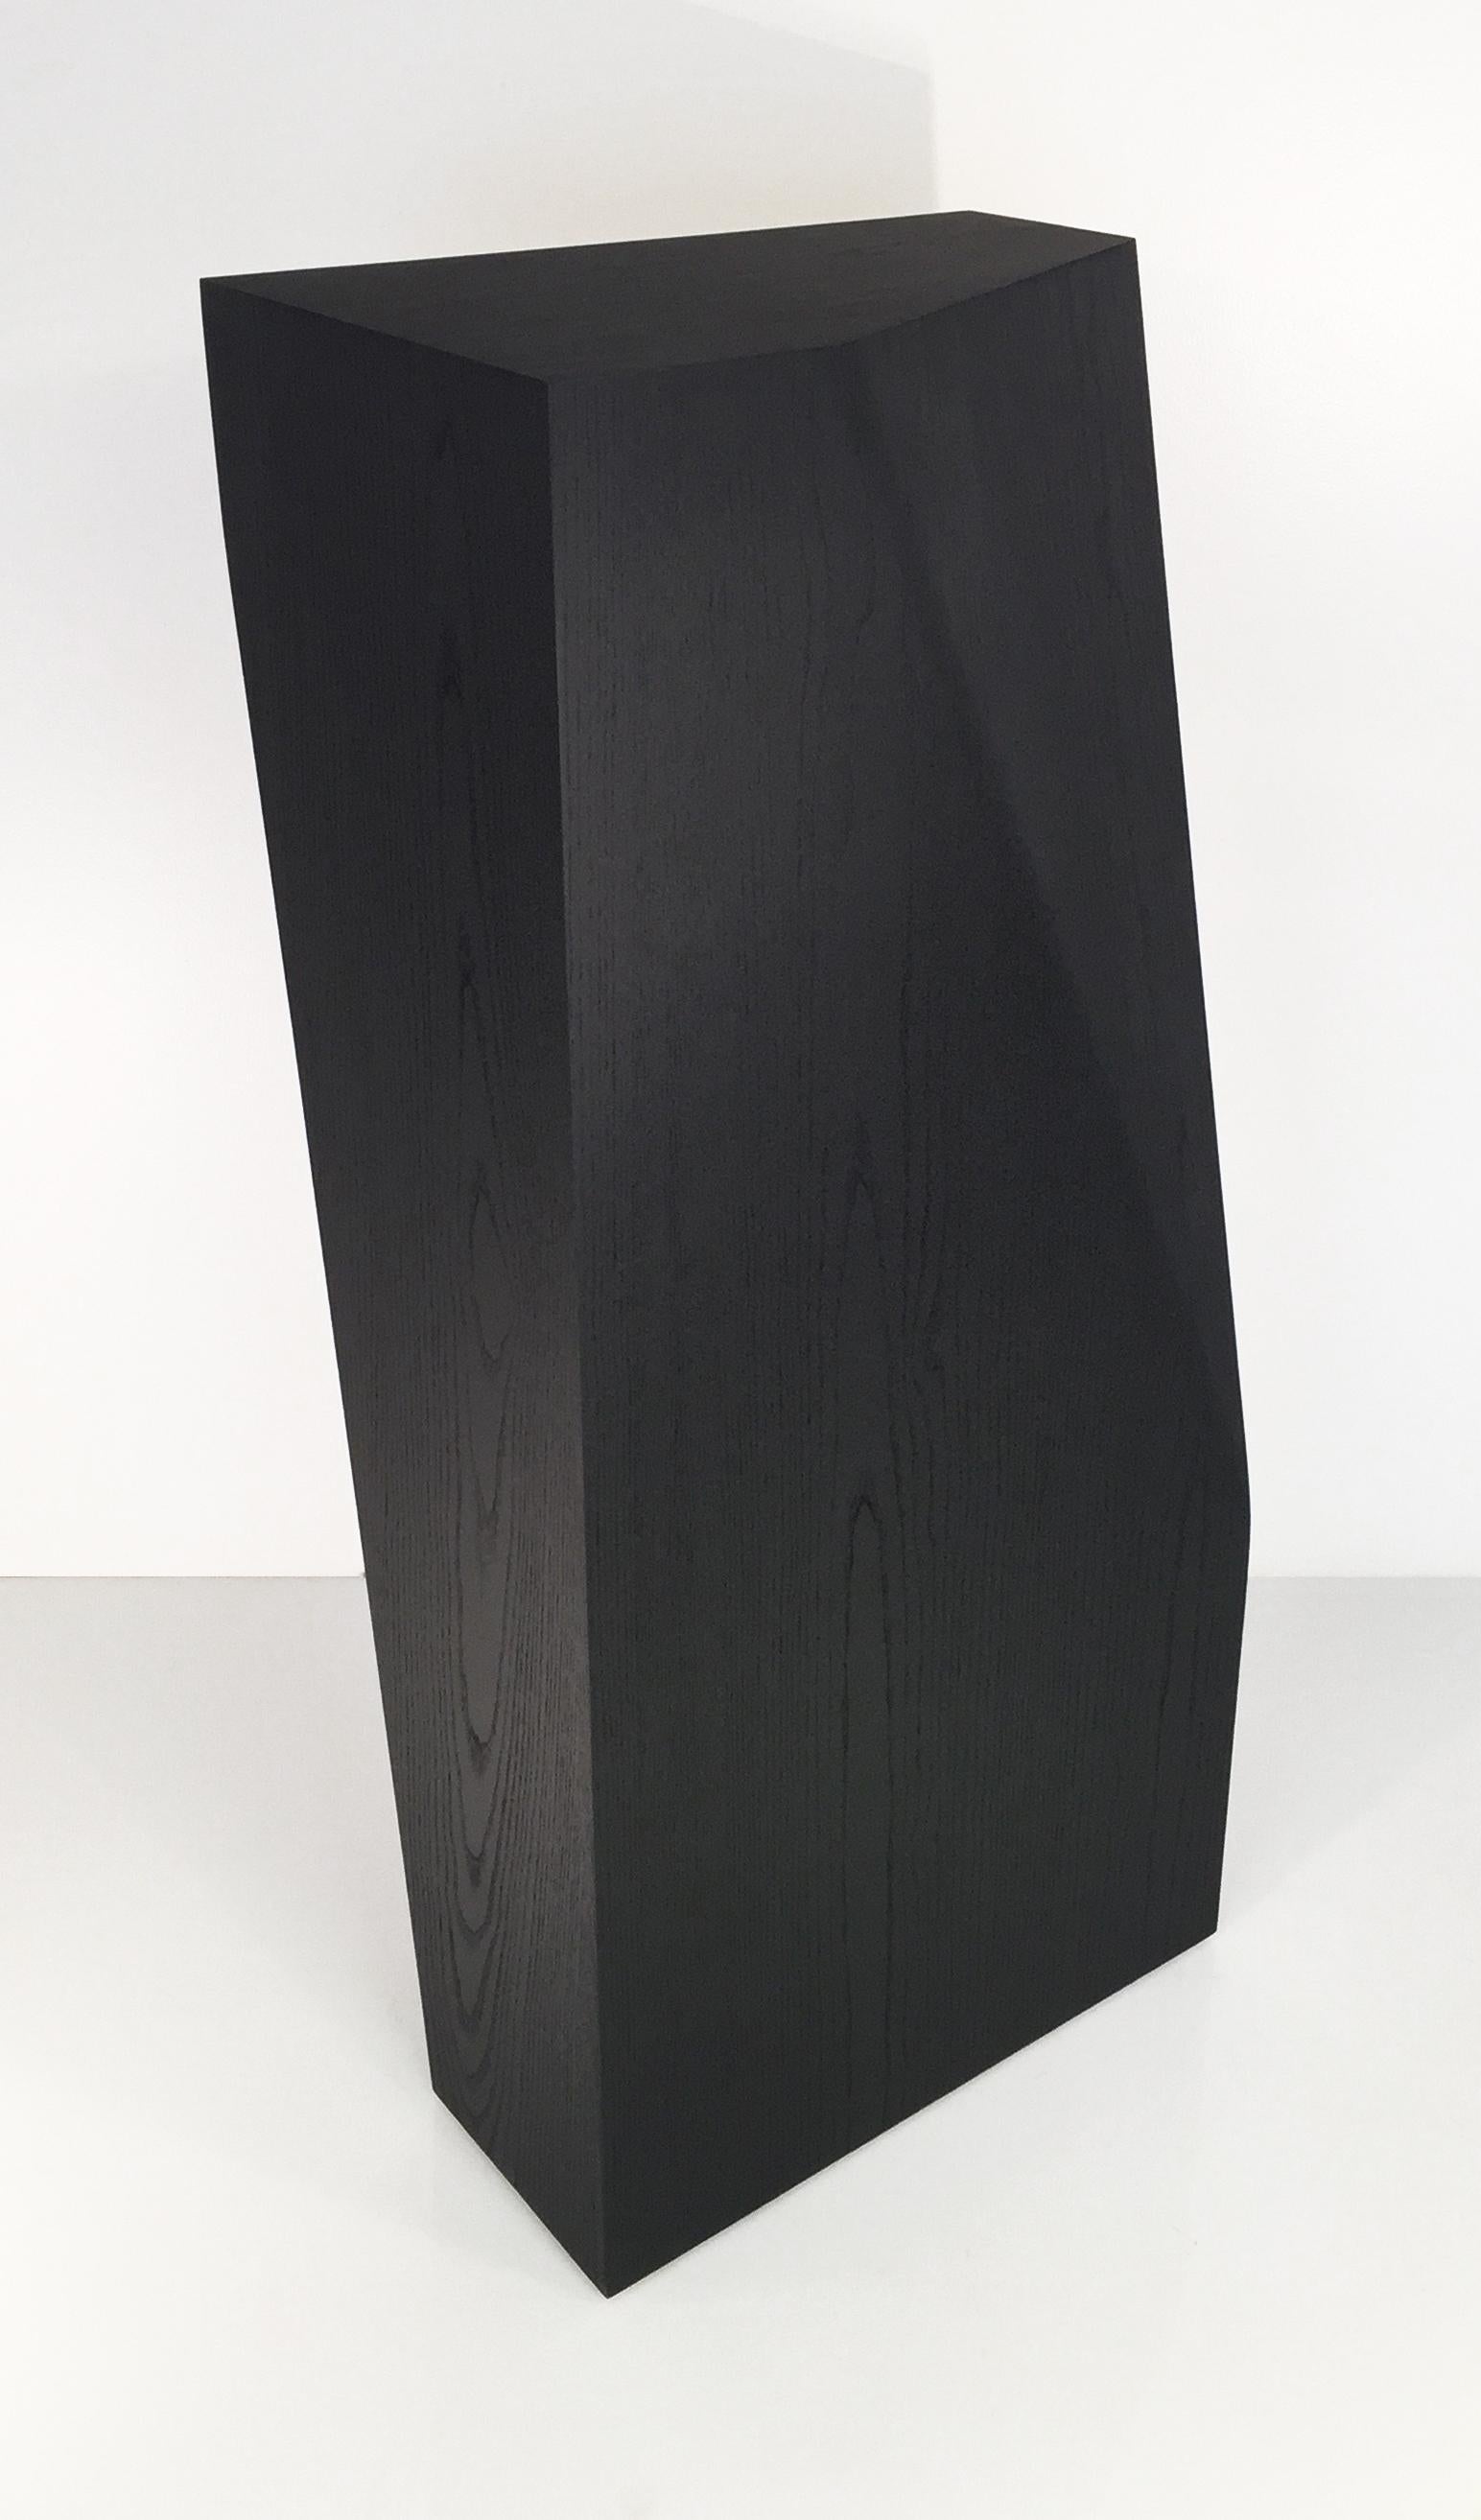 Hand-Crafted 'scarecrow' william earle's modernist pedestal still made by hand by the artist